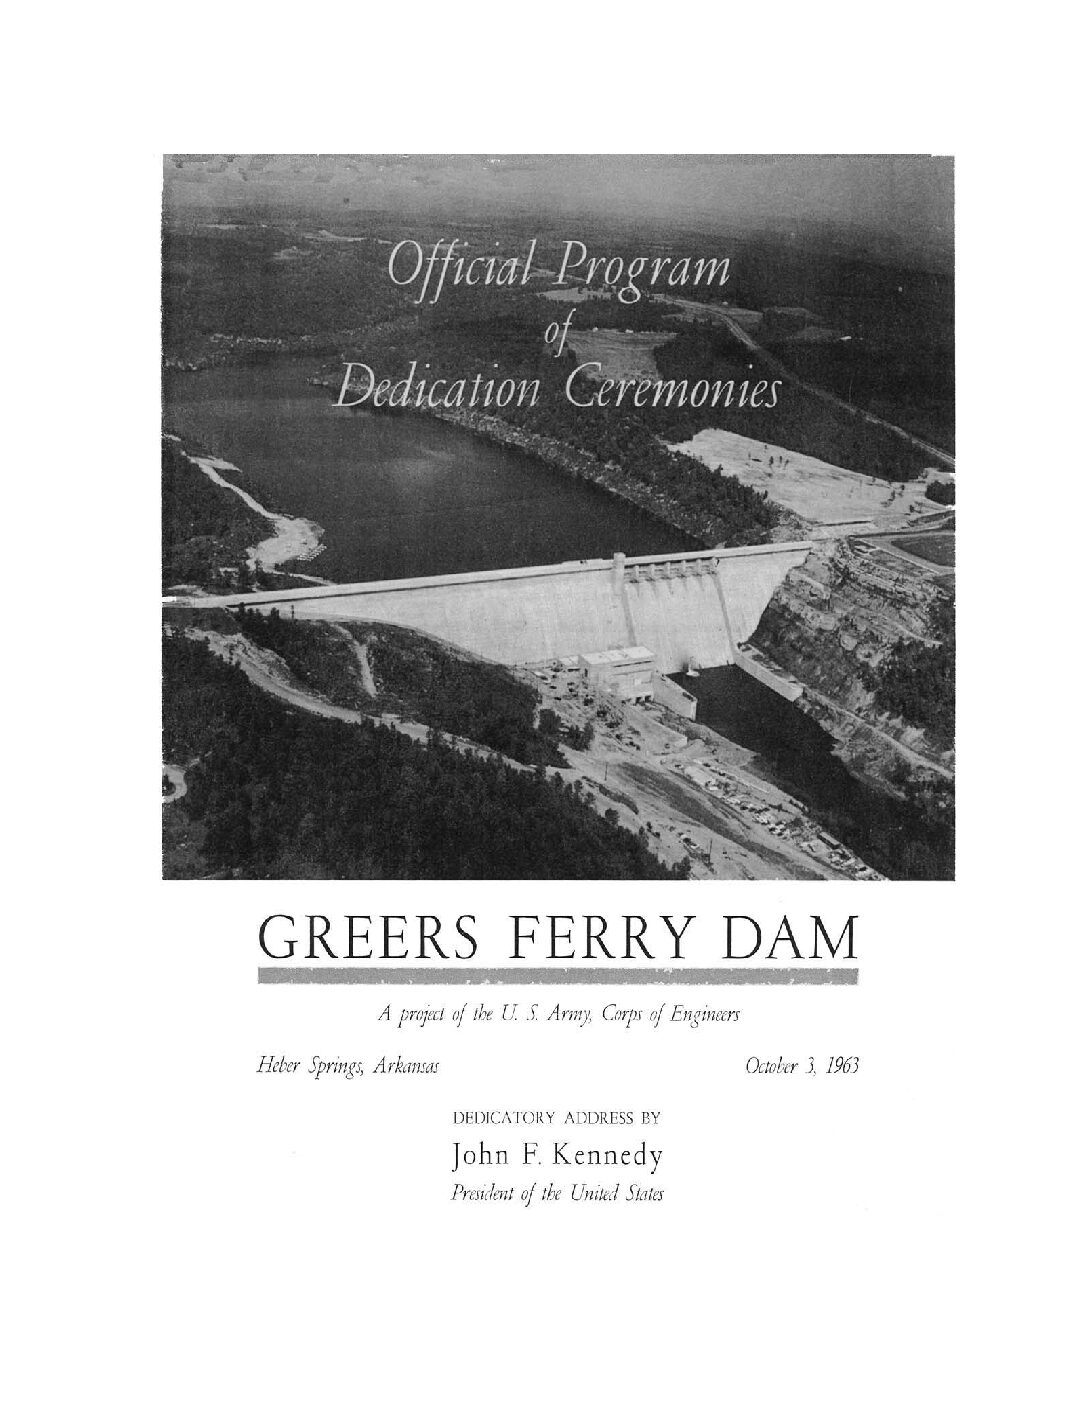 Concrete dam and lake with "Official Program of Dedication Ceremonies, Greers Ferry Dam, A Project of the U.S. Army Corps of Engineers," written on it